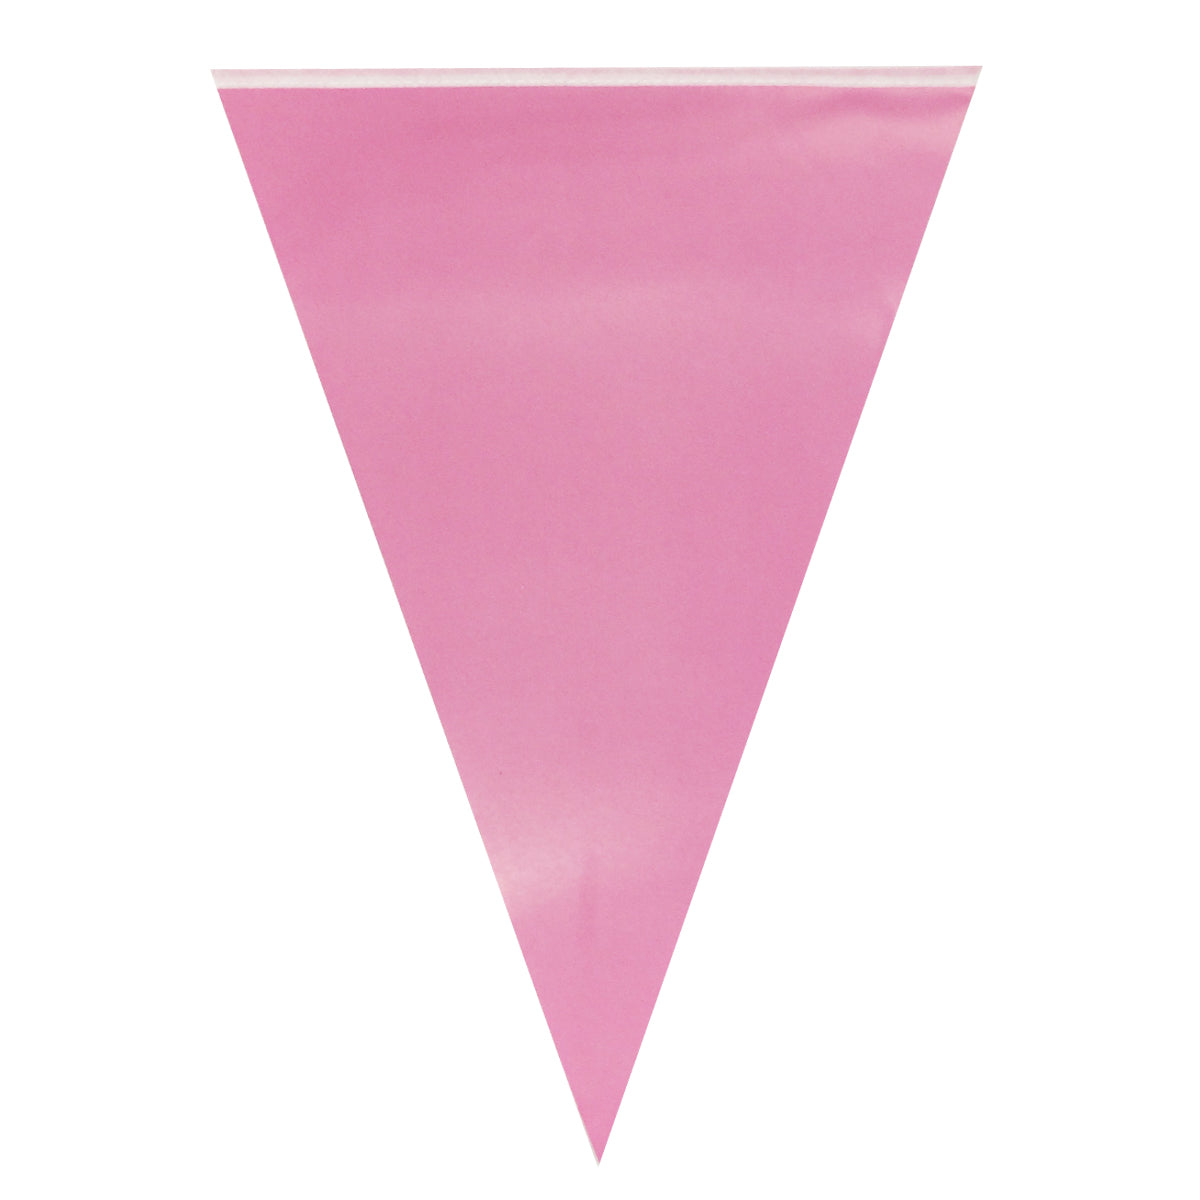 Wrapables Triangle Pennant Banner Party Decorations